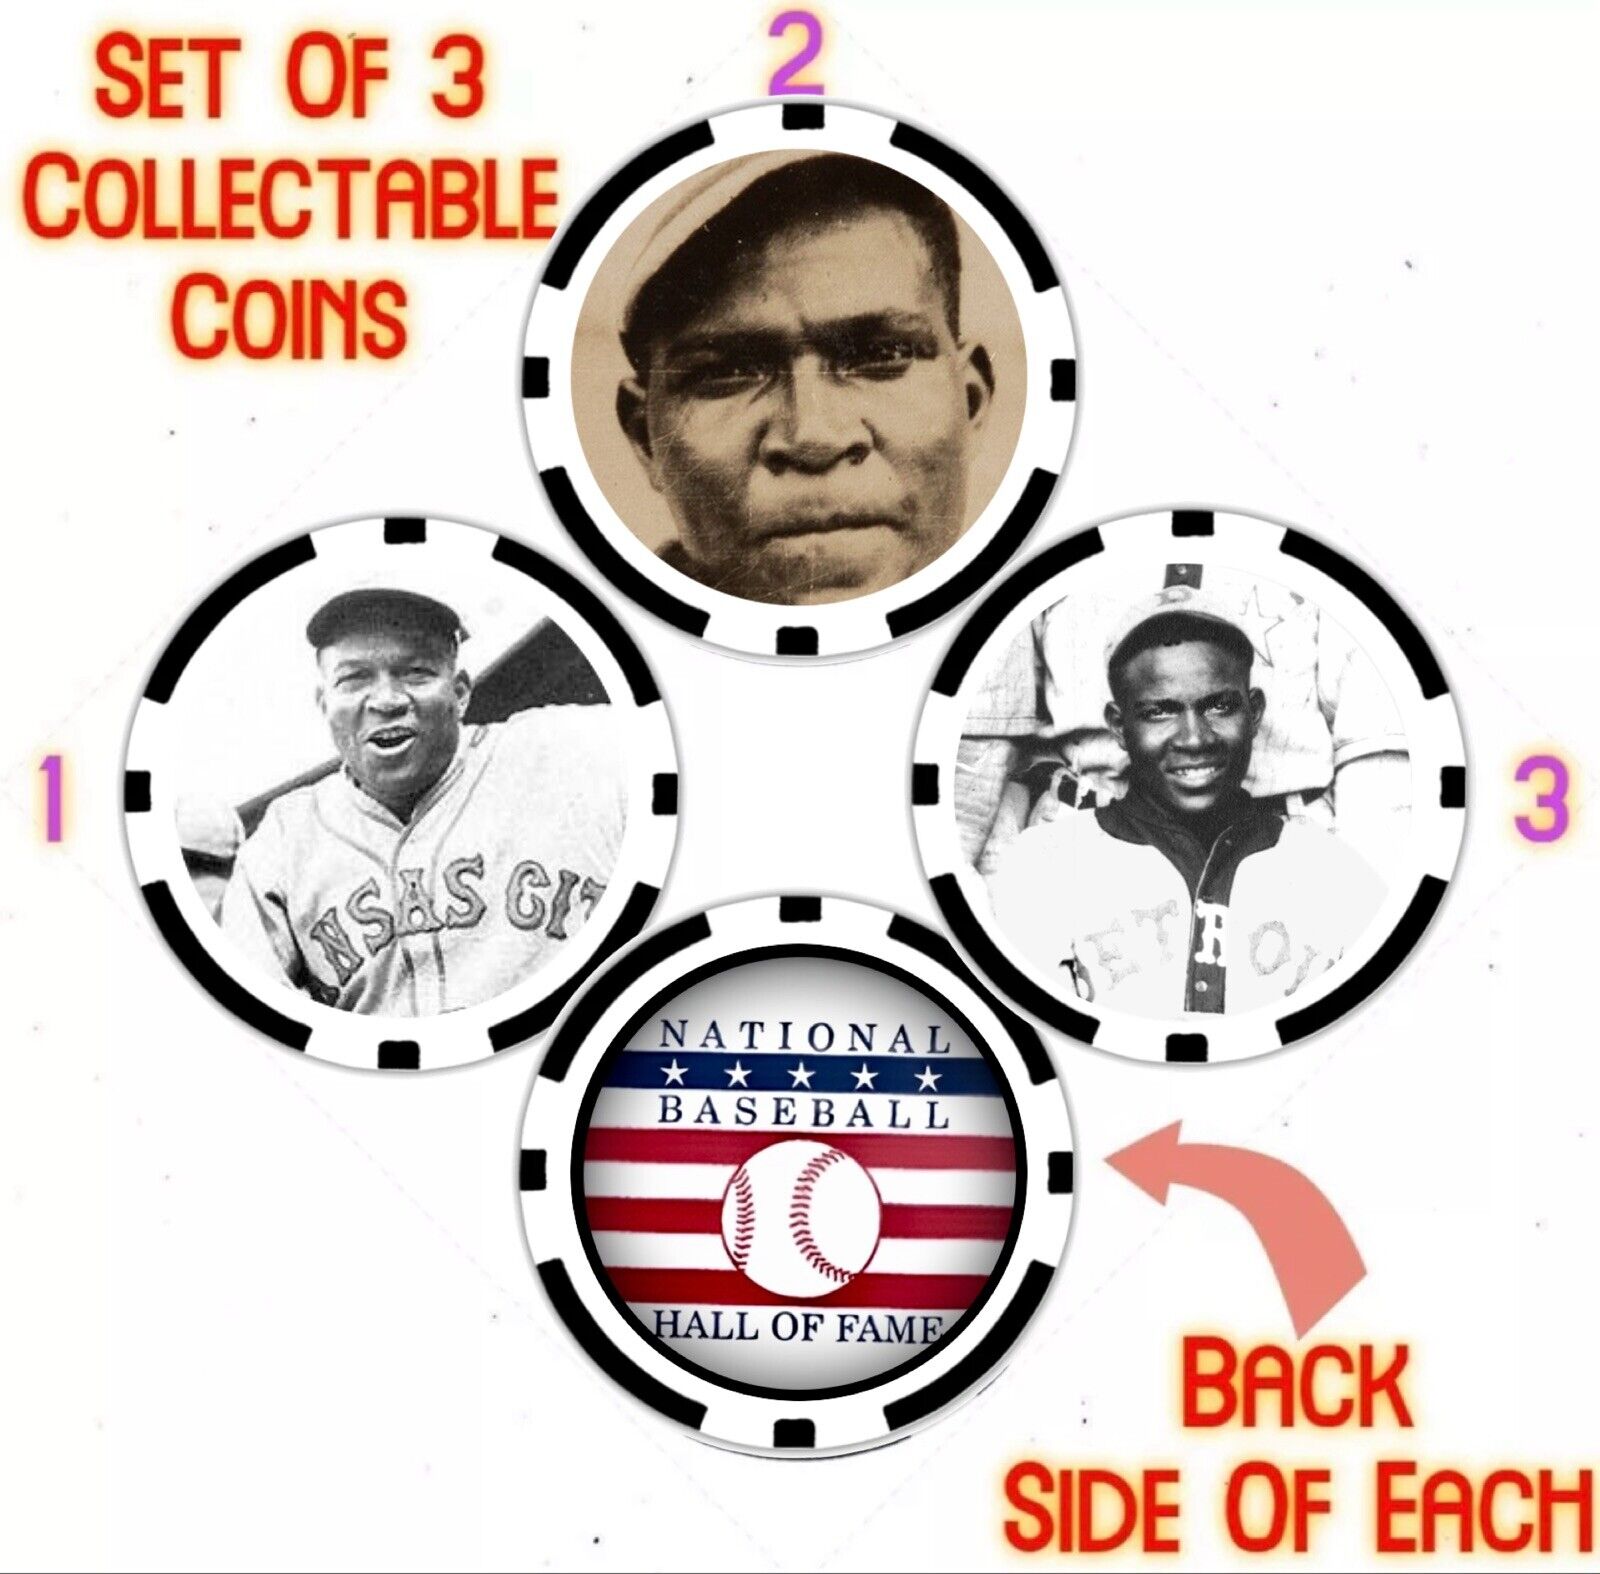 Andy Cooper - THREE (3) COMMEMORATIVE POKER CHIP/COIN SET